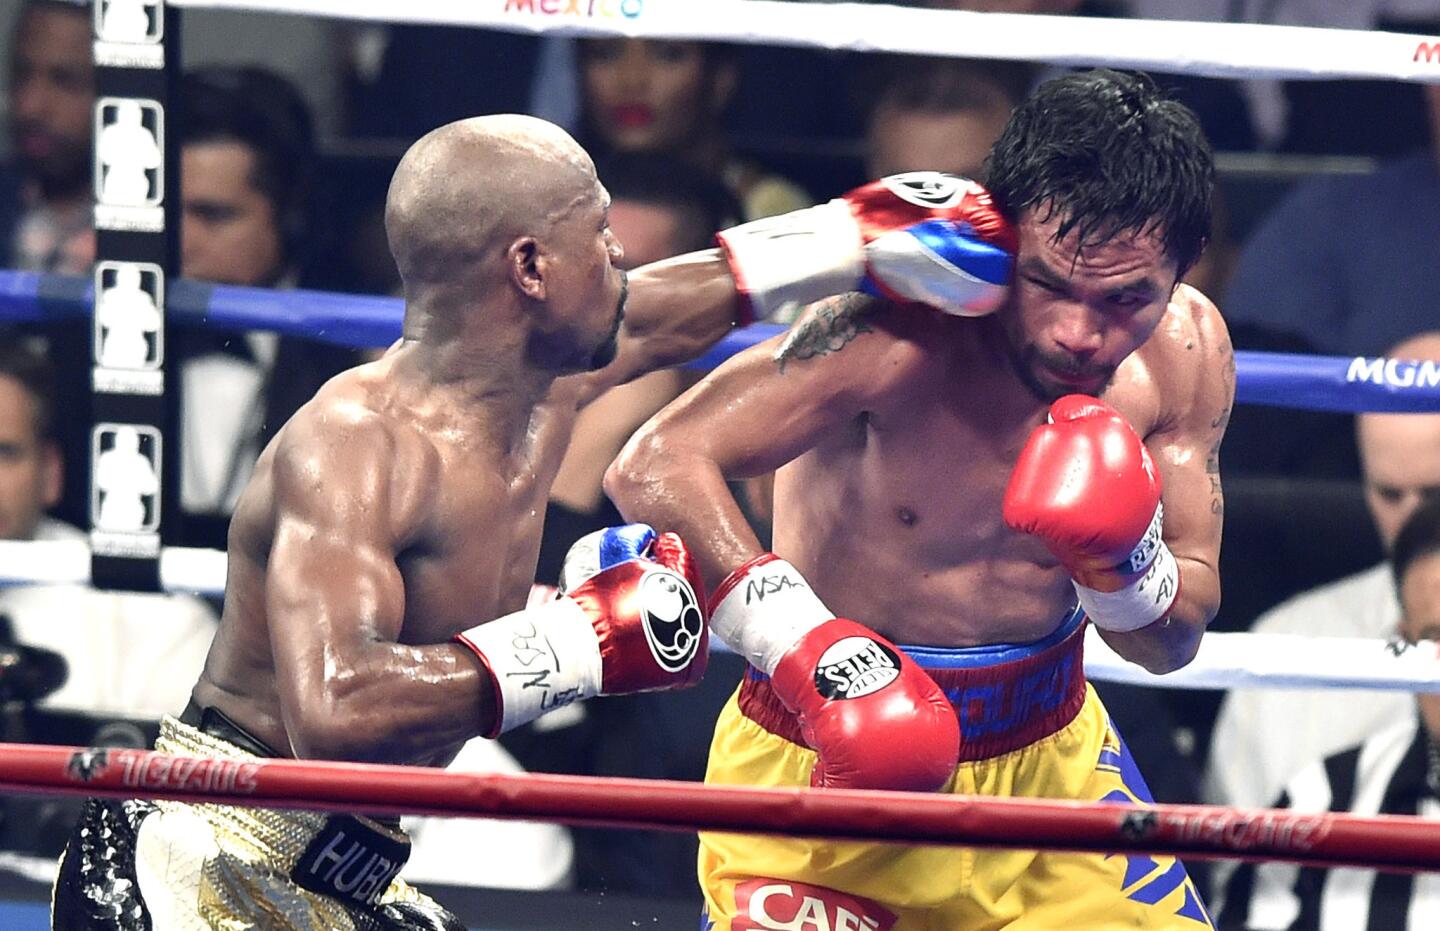 Floyd Mayweather Jr. lands a punch in the eighth round against Manny Pacquiao during their welterweight title fight on May 2, 2015.